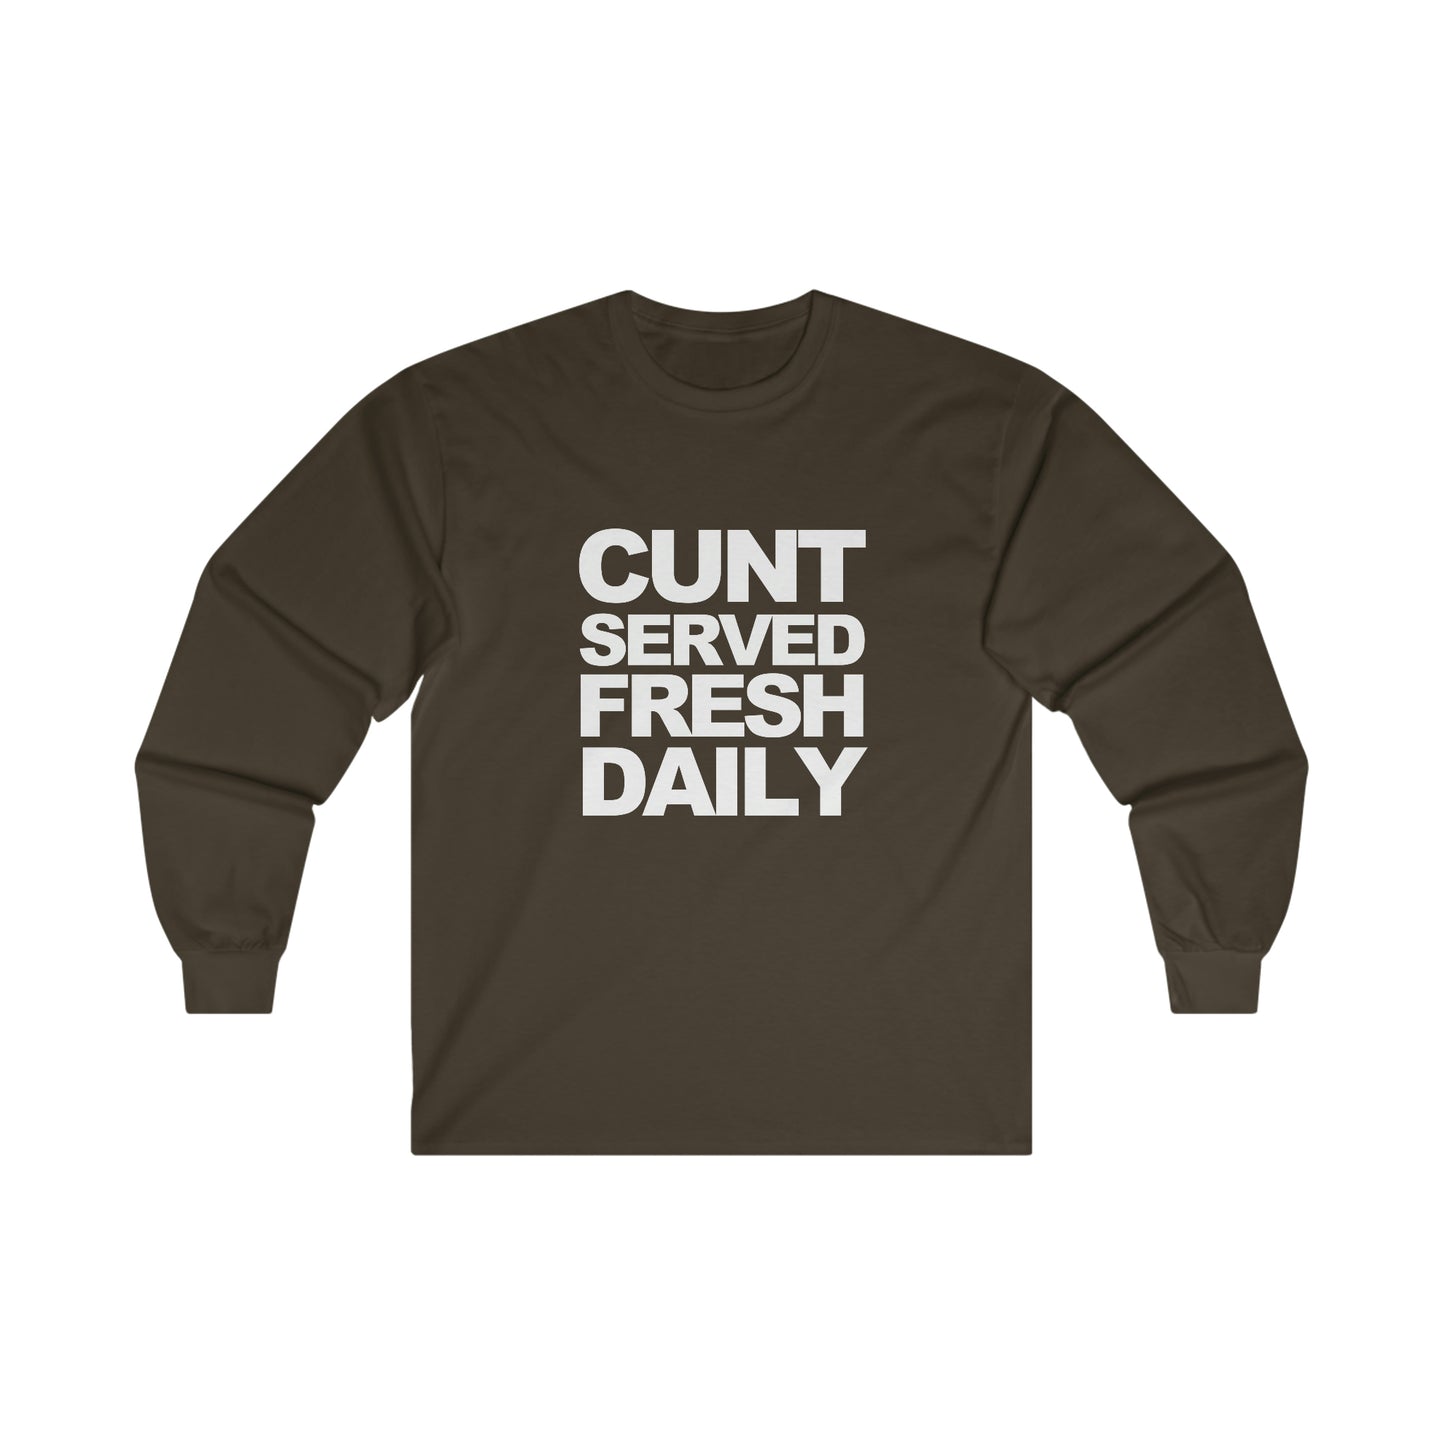 Cunt Served Fresh Daily Shirt, Y2k Aesthetic Long Sleeve T-Shirt